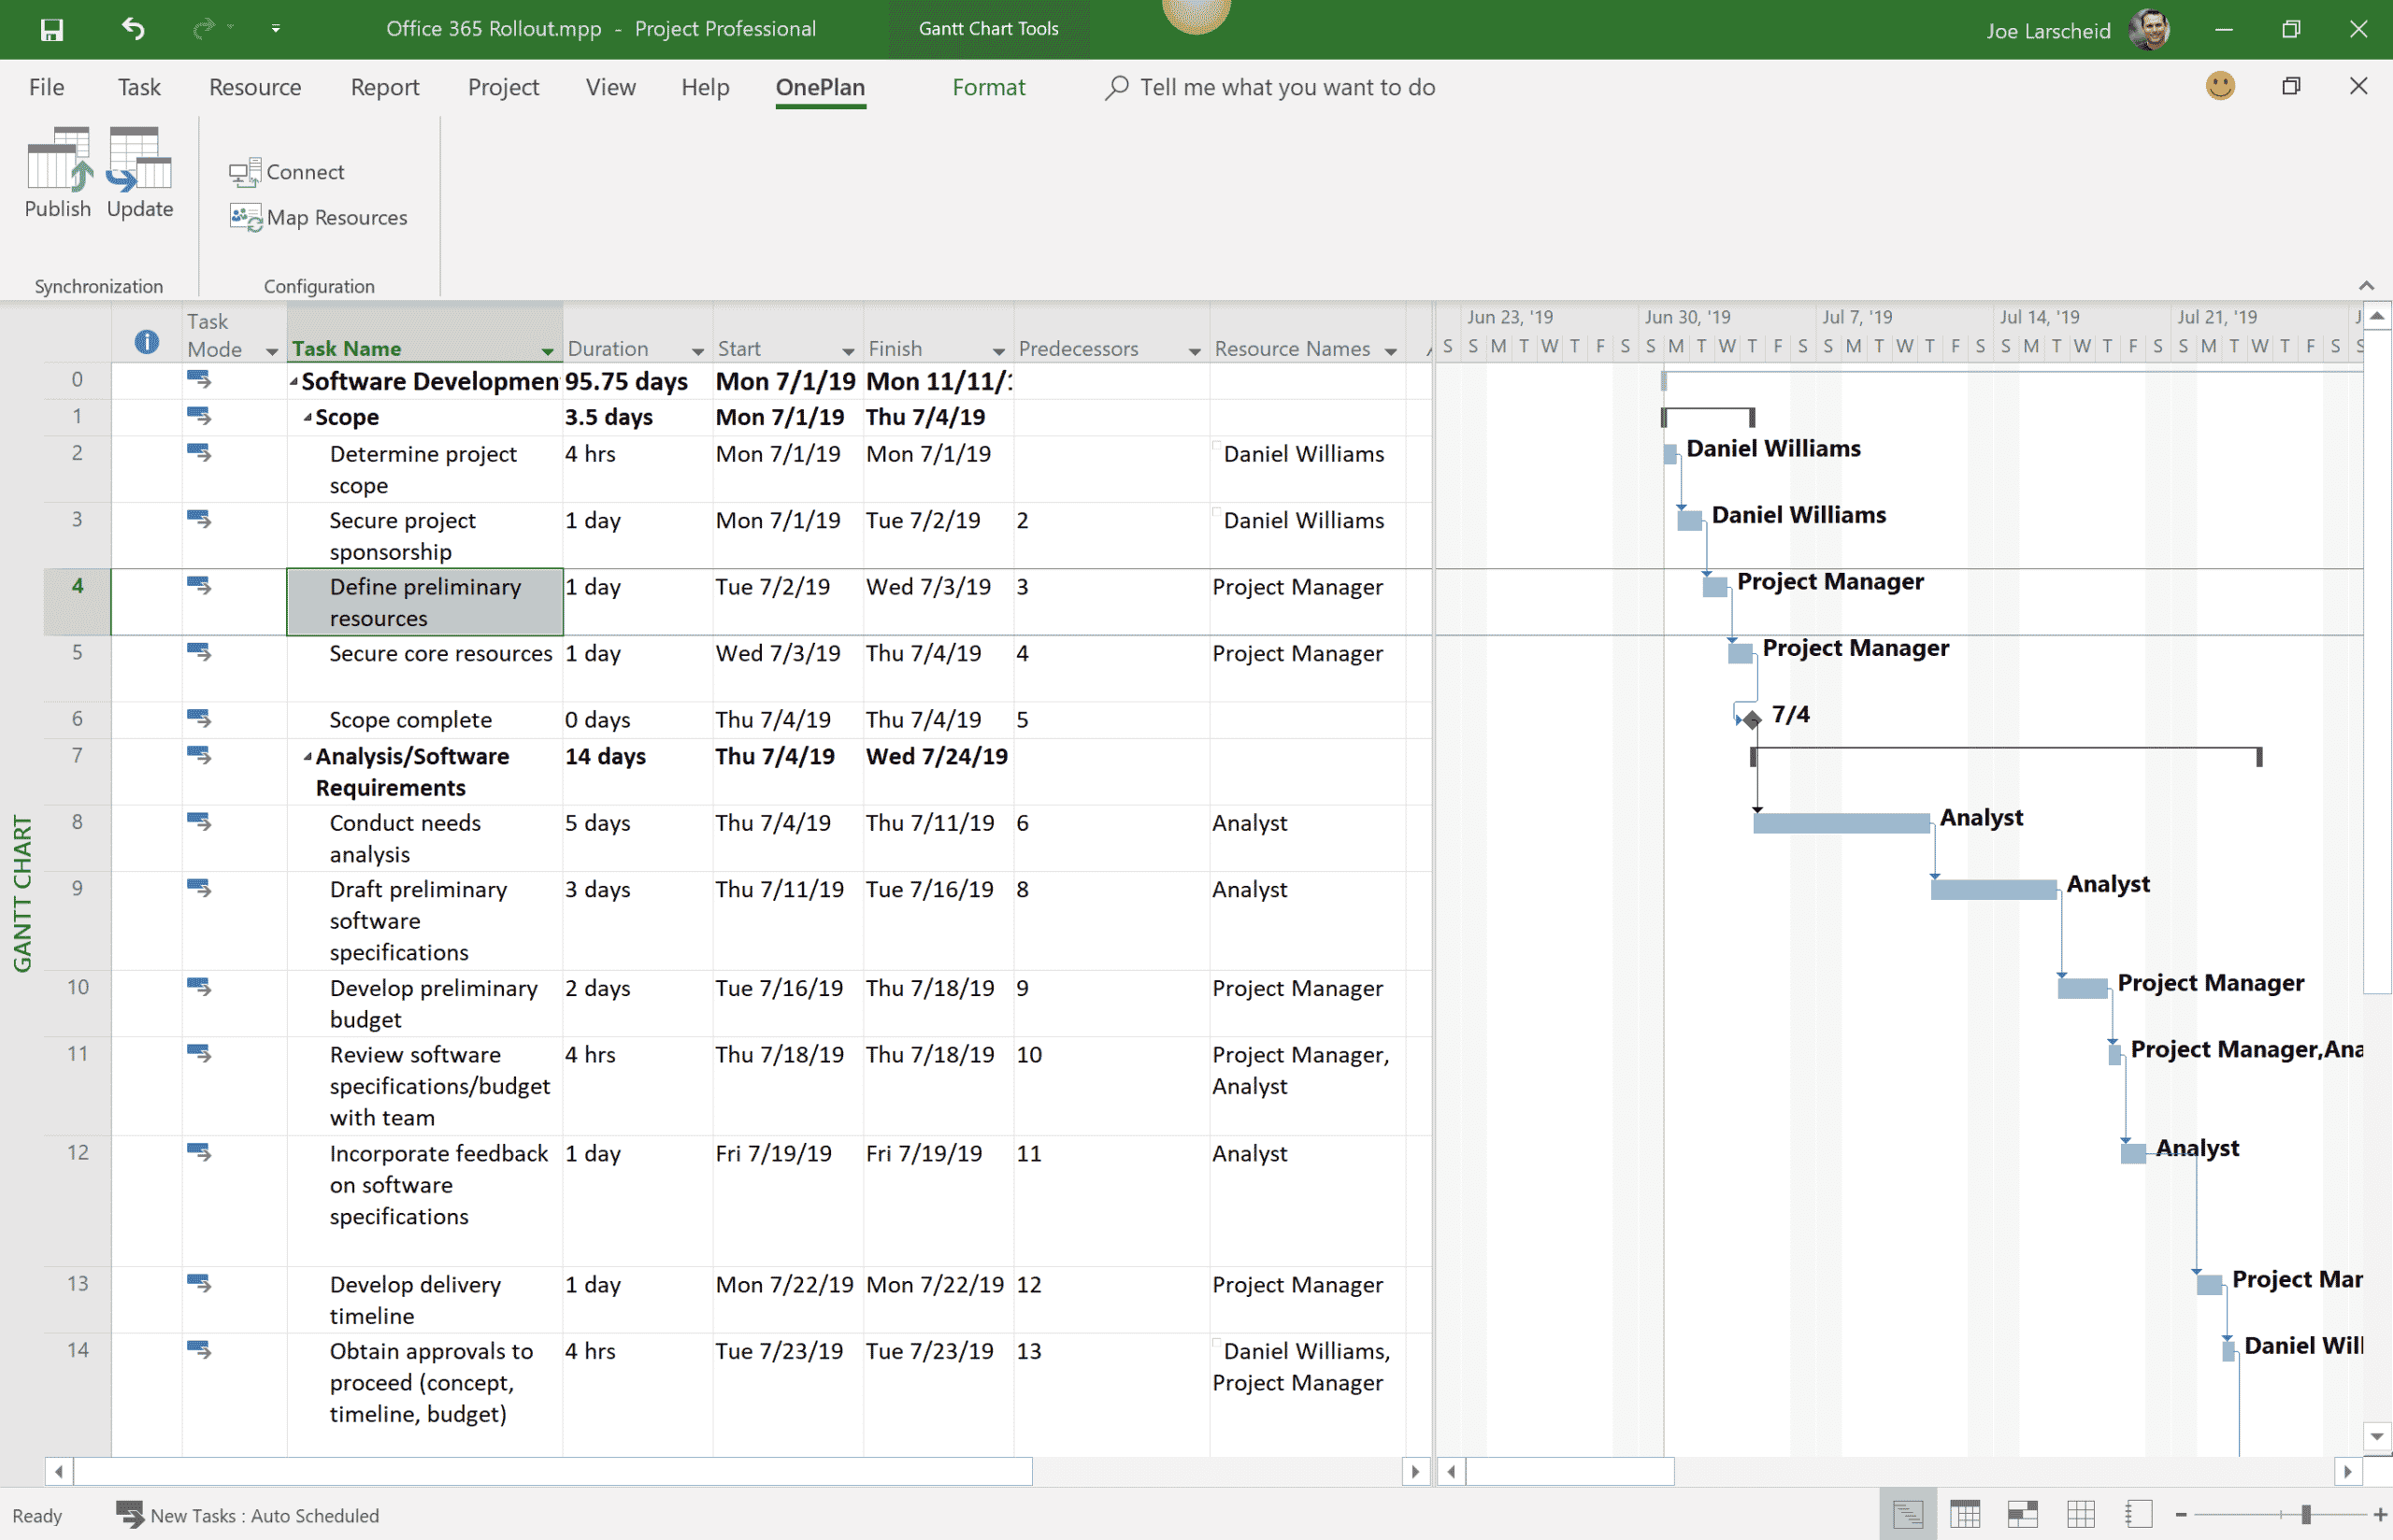 screenshot-of-task-assignment-in-ms-project-download-scientific-diagram